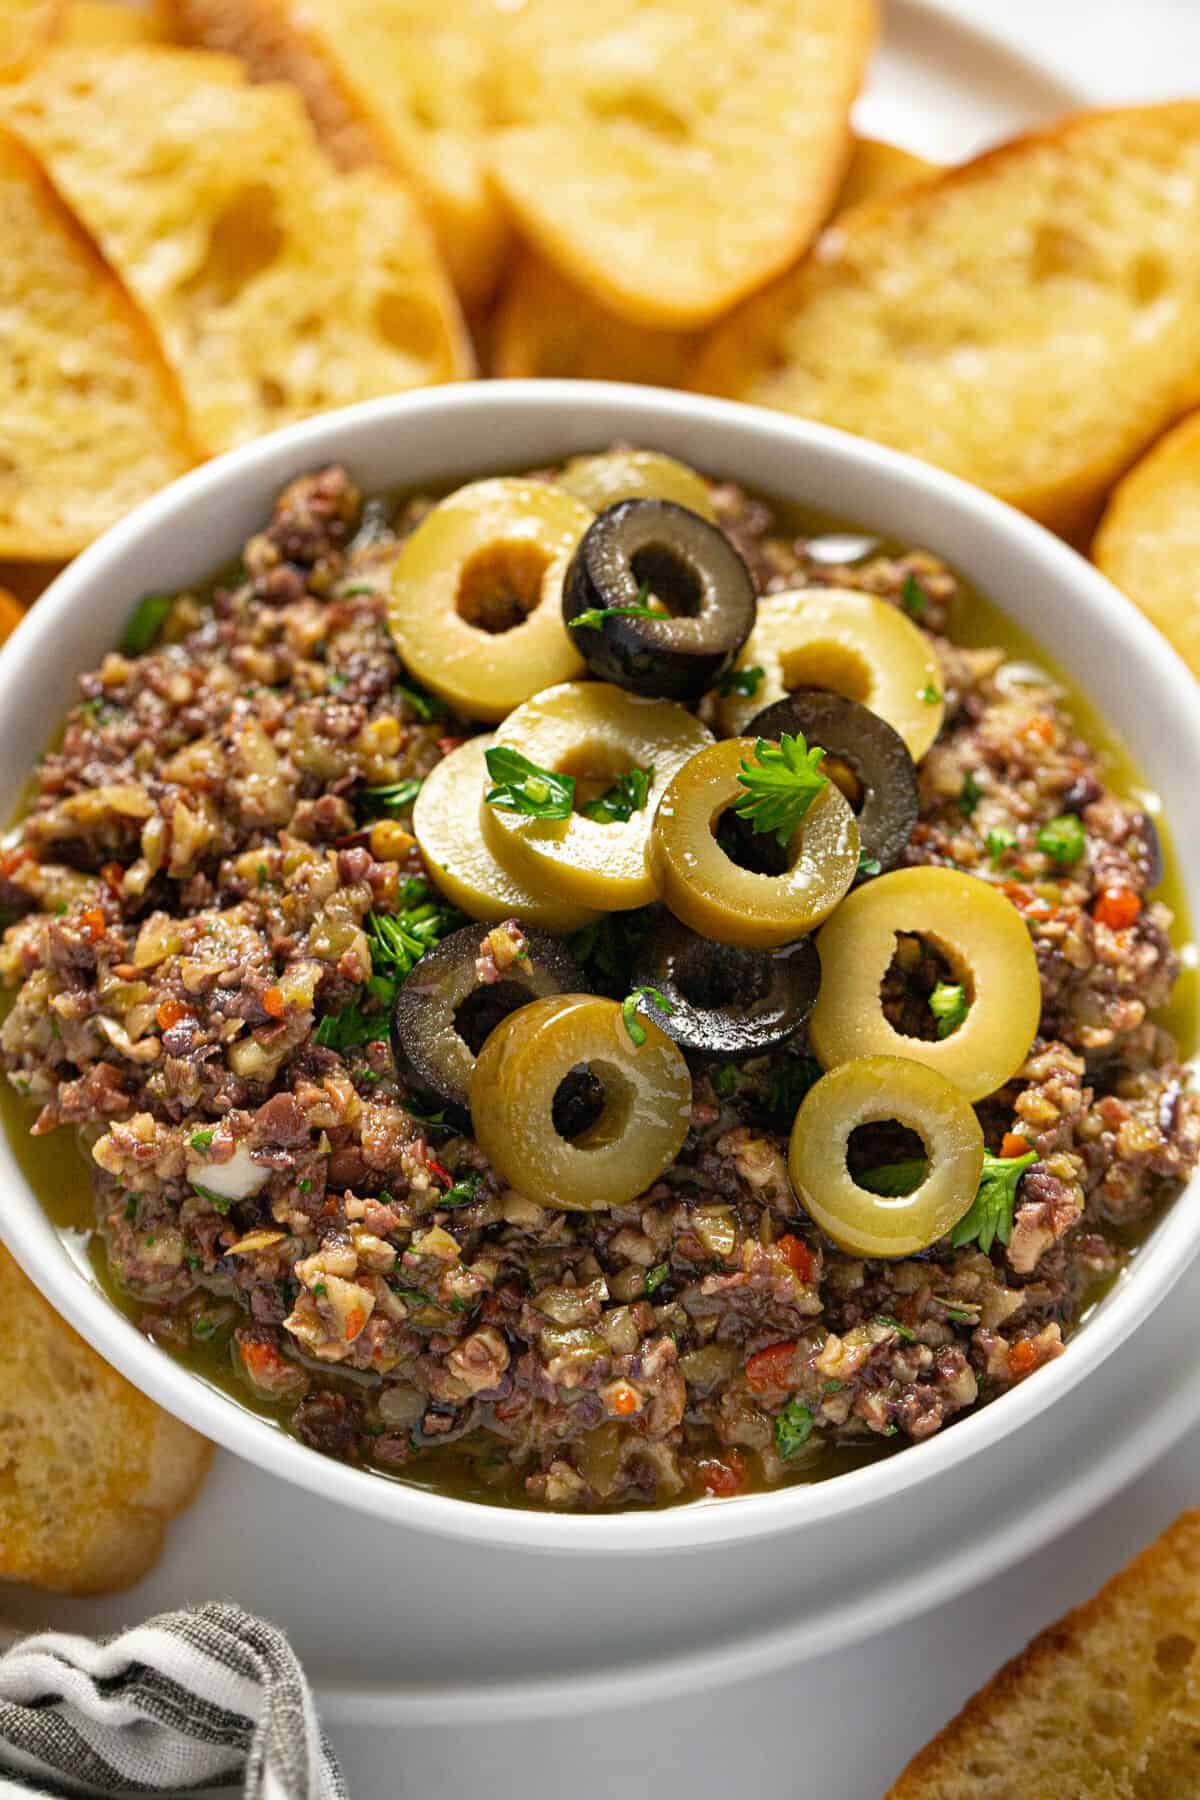 White bowl filled with homemade olive tapenade garnished with sliced olives and parsley